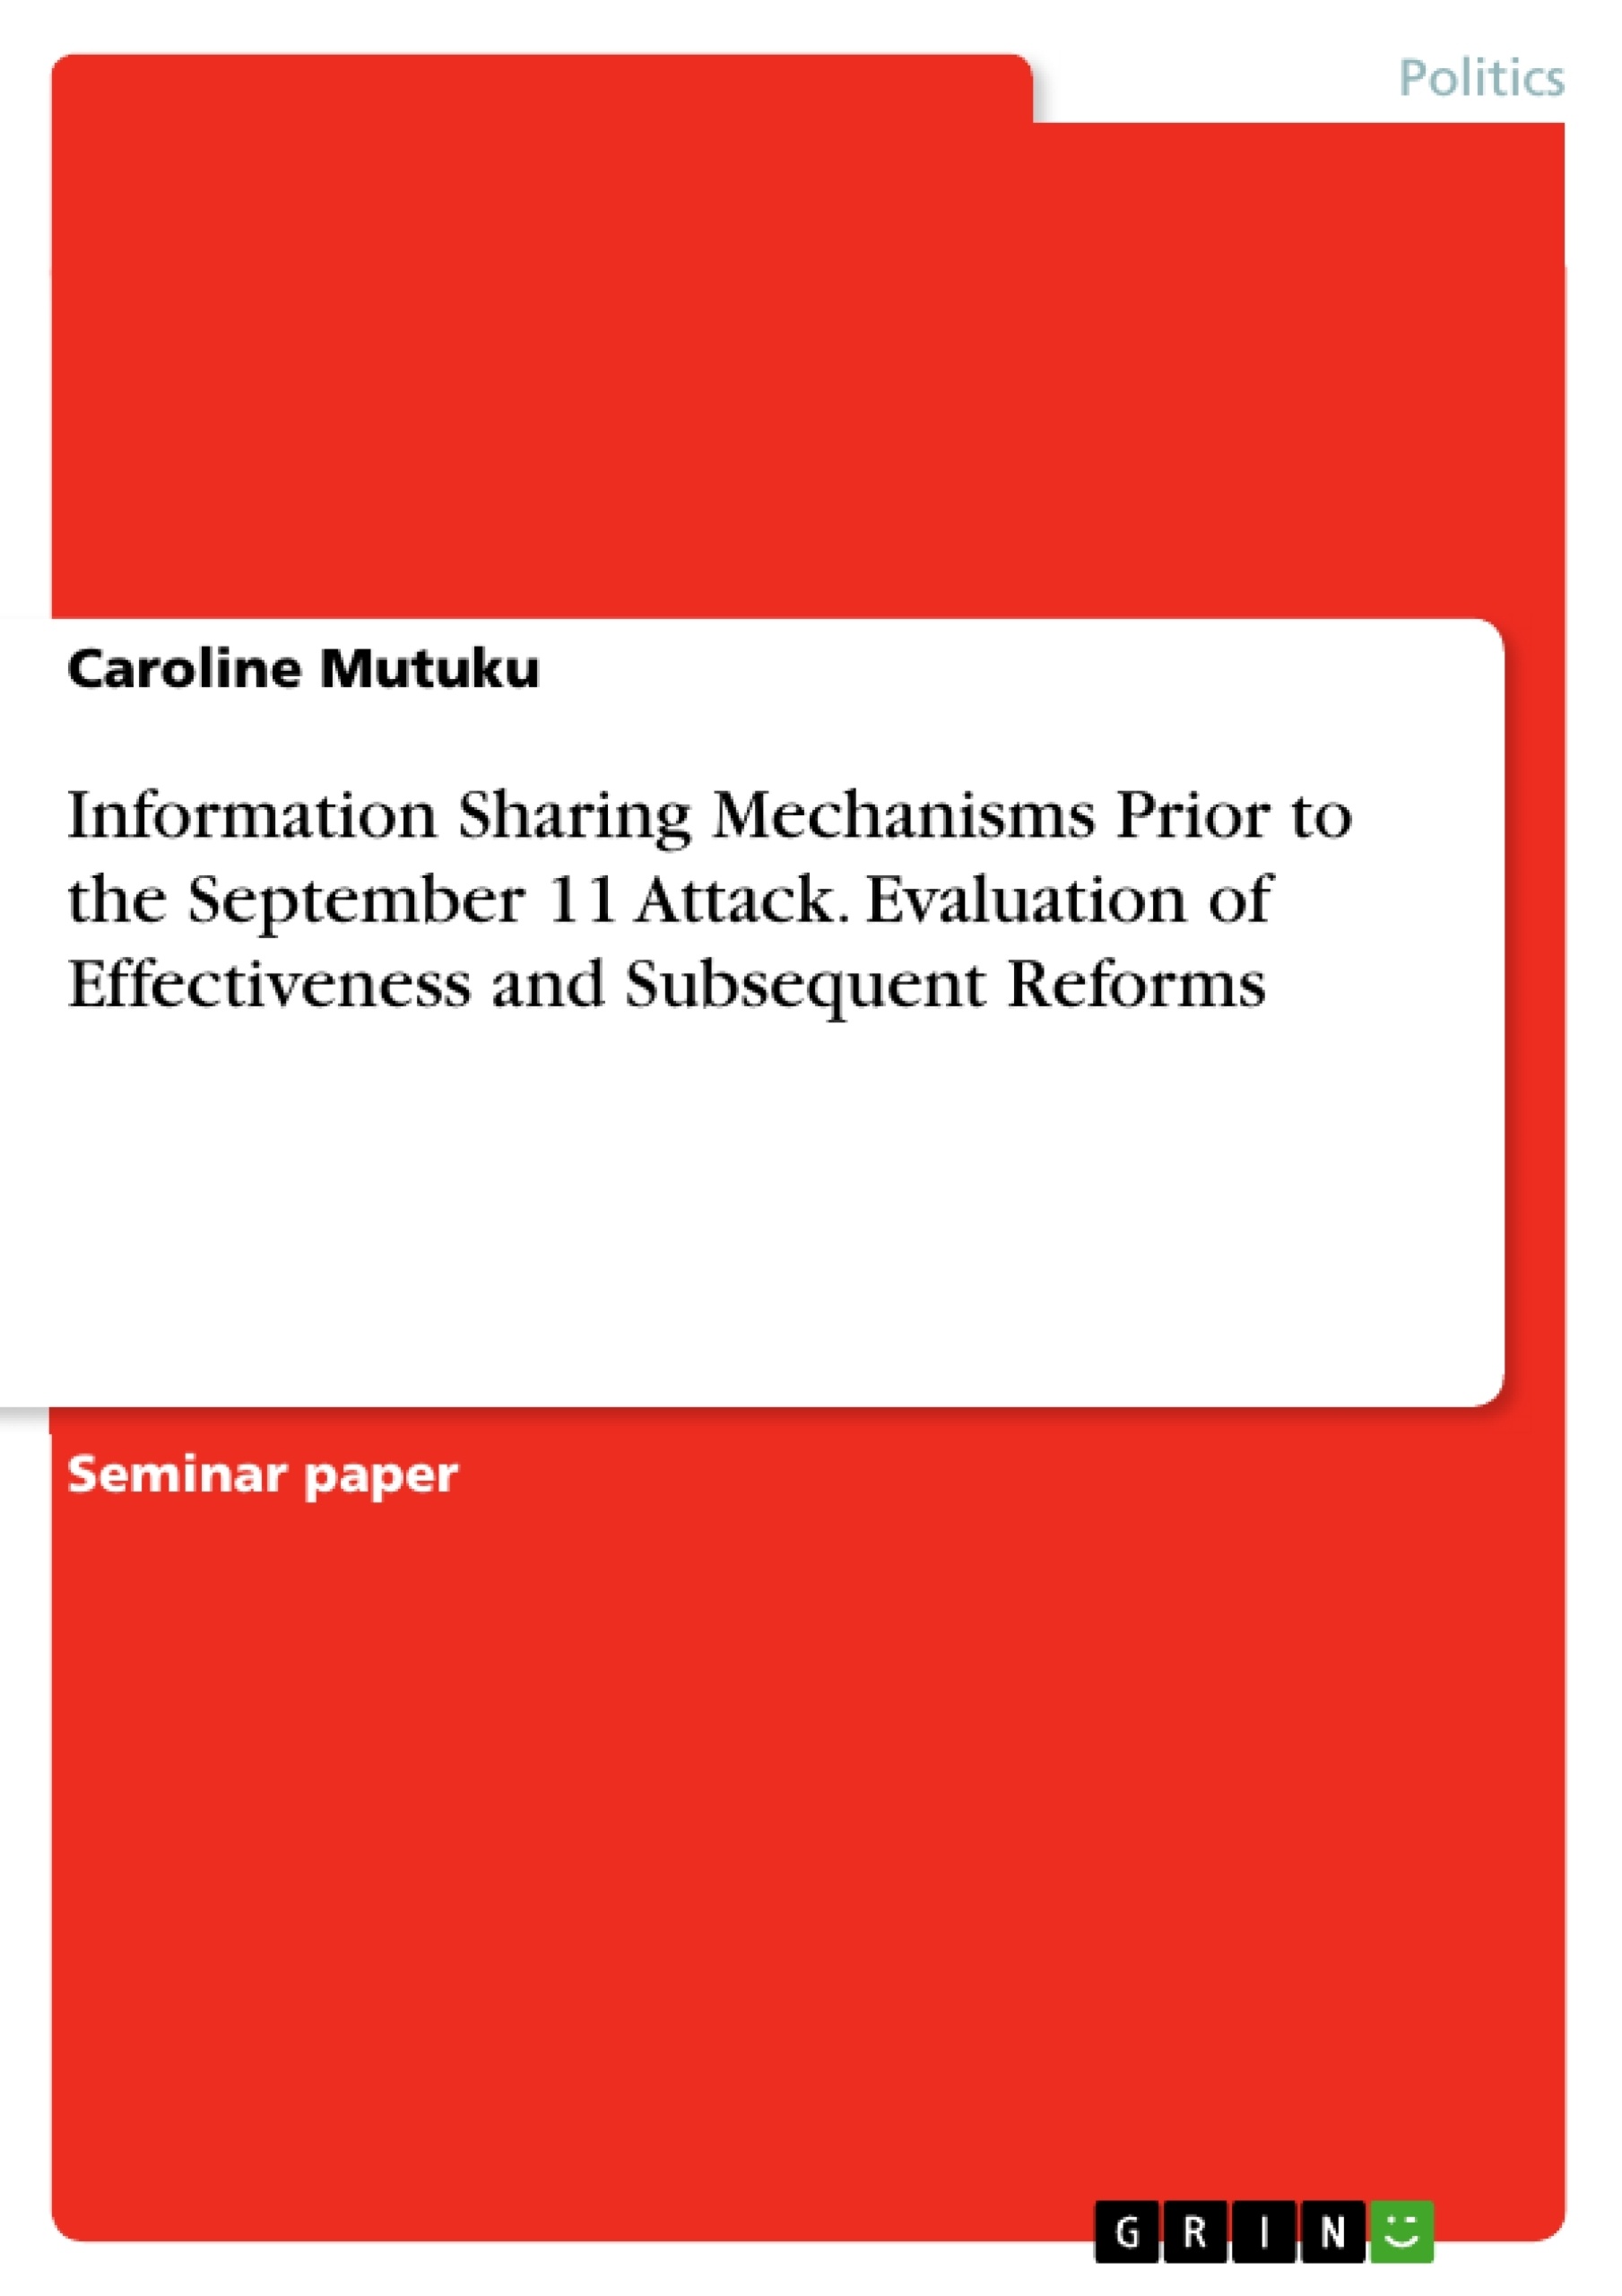 Title: Information Sharing Mechanisms Prior to the September 11 Attack. Evaluation of Effectiveness and Subsequent Reforms